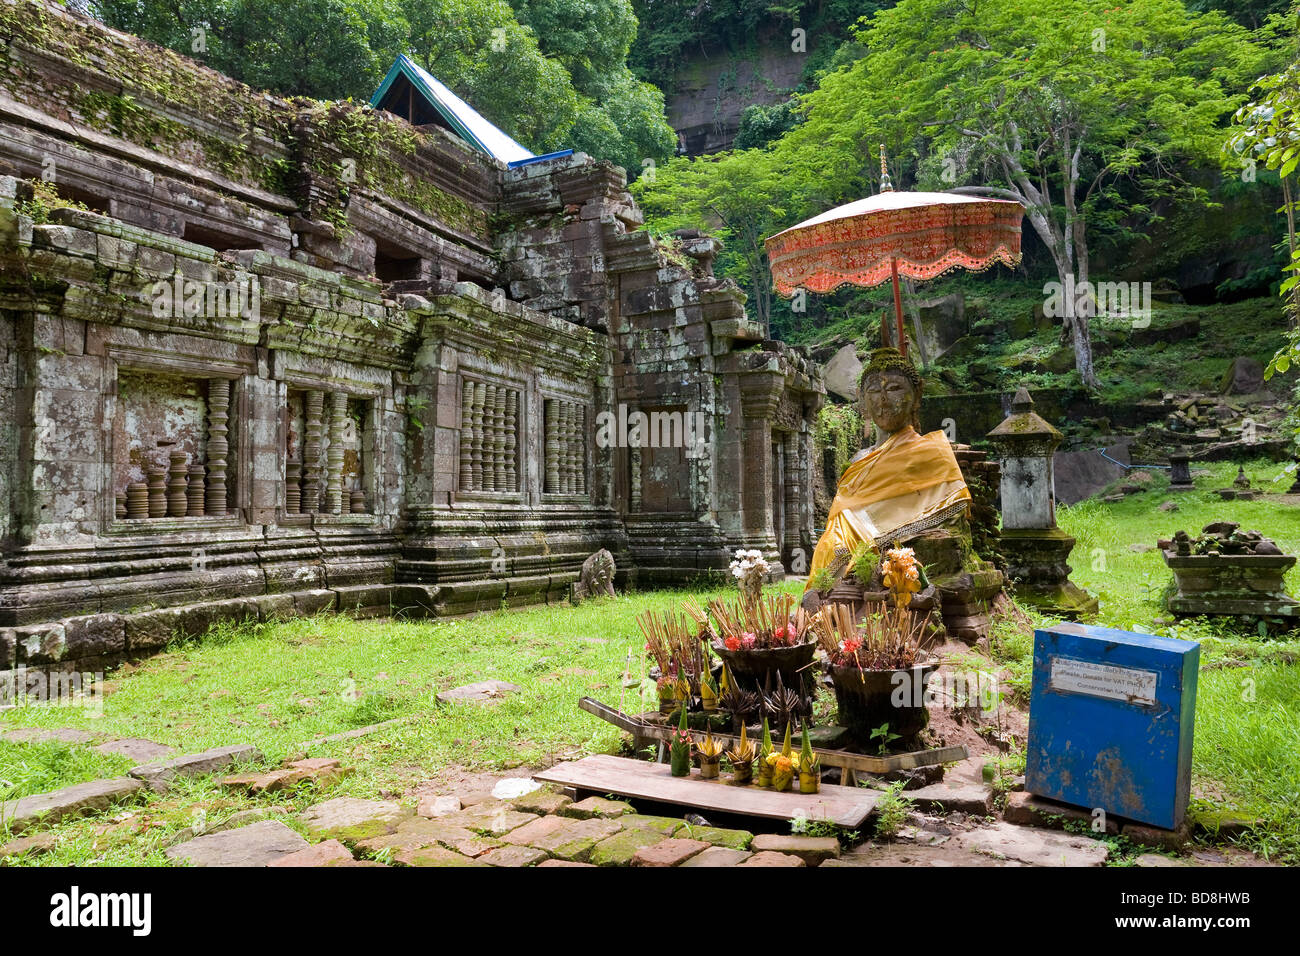 A working Buddhist shrine at the top of the Champasak temple complex Laos Stock Photo